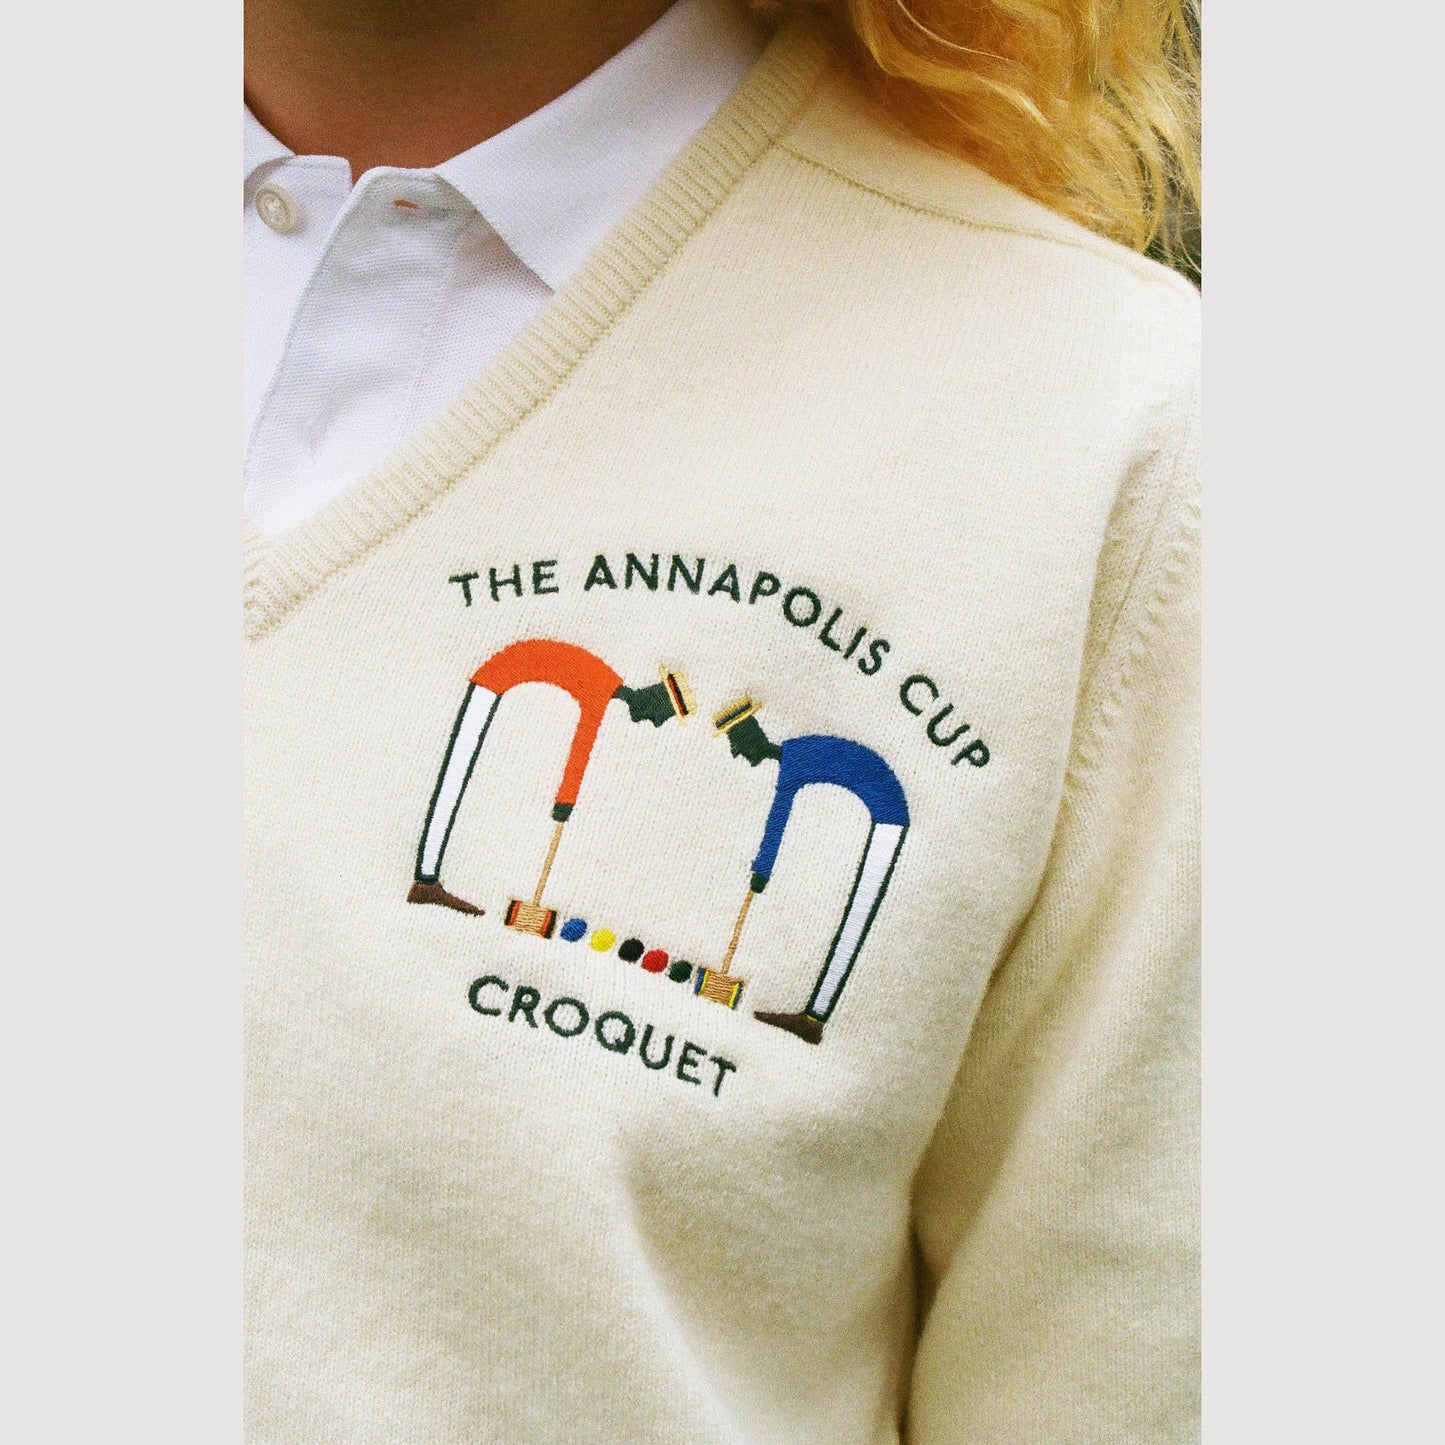 100% Lambswool Sweater (The Annapolis Cup Sweater)